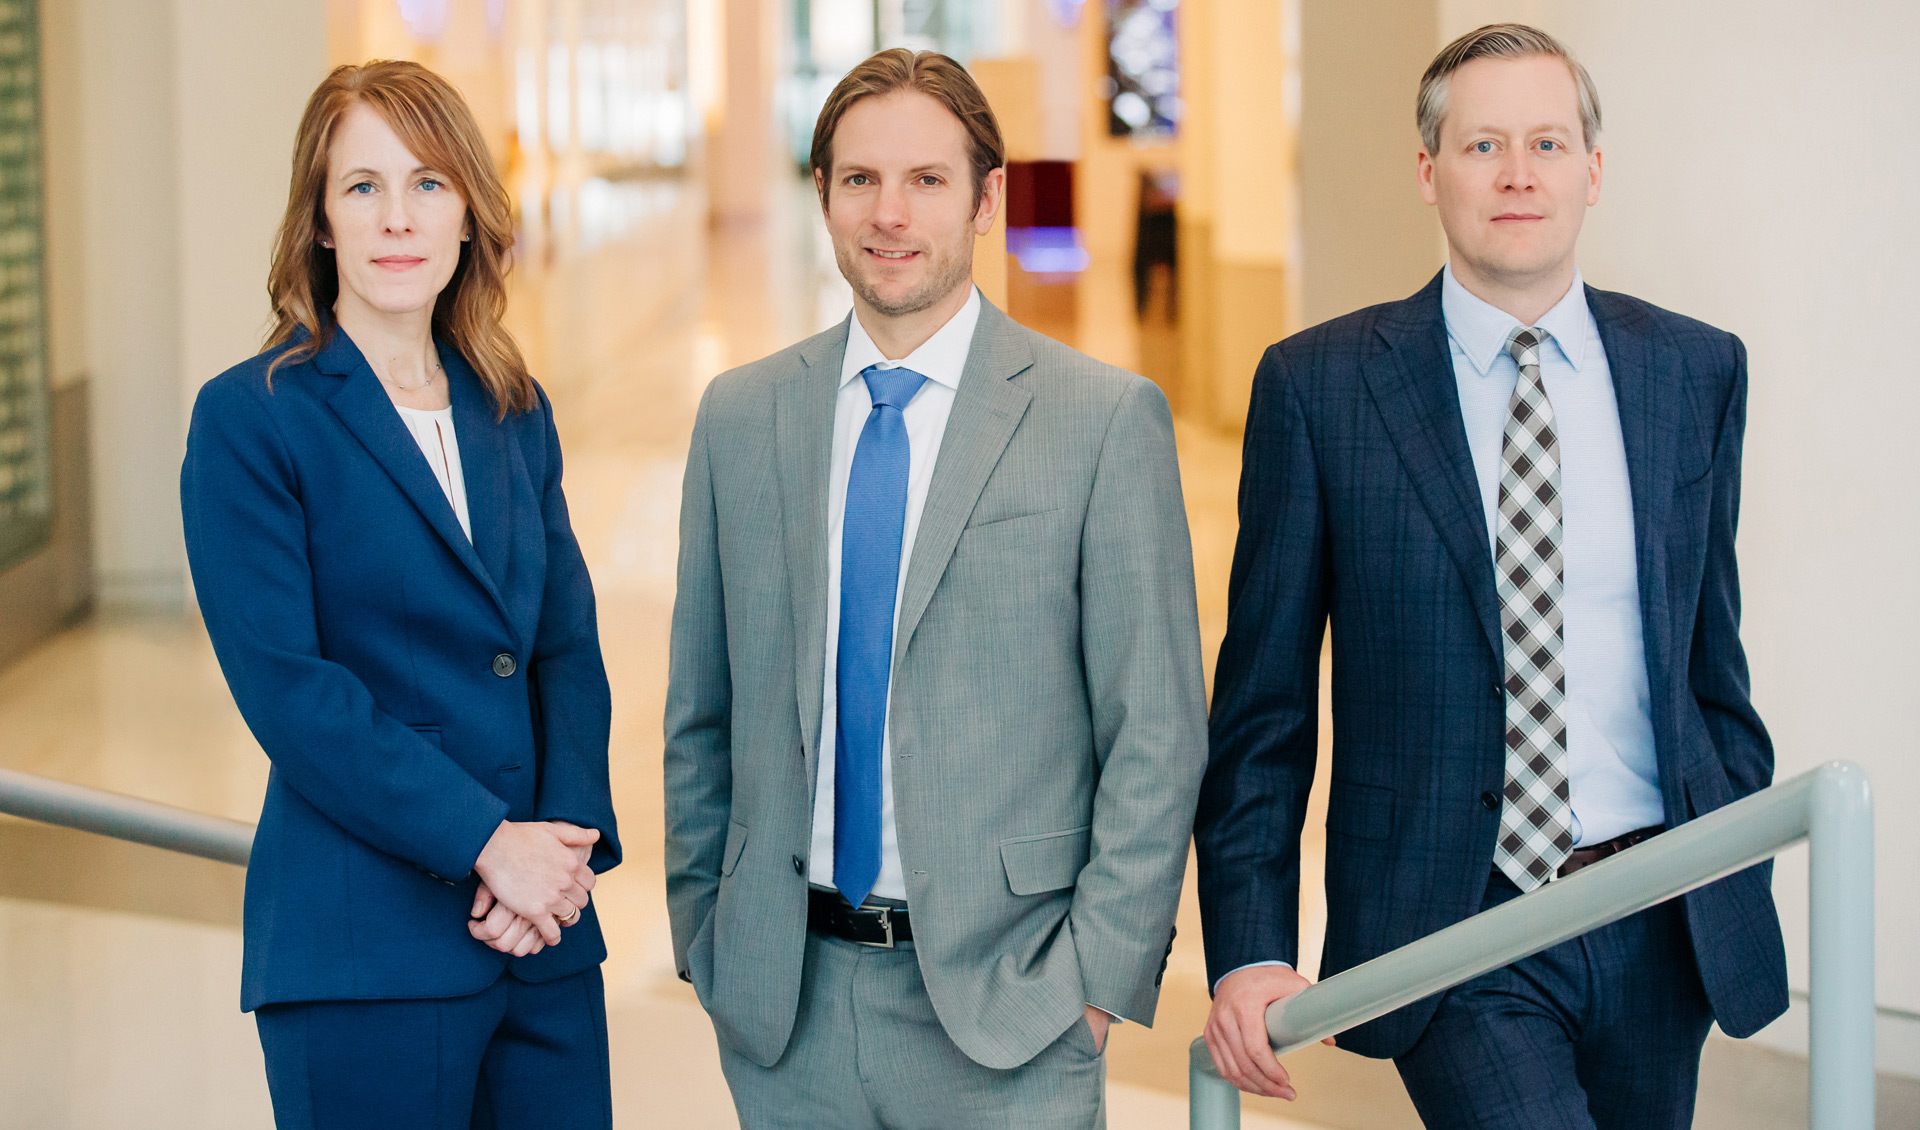 Image of the 3 attorneys at the firm